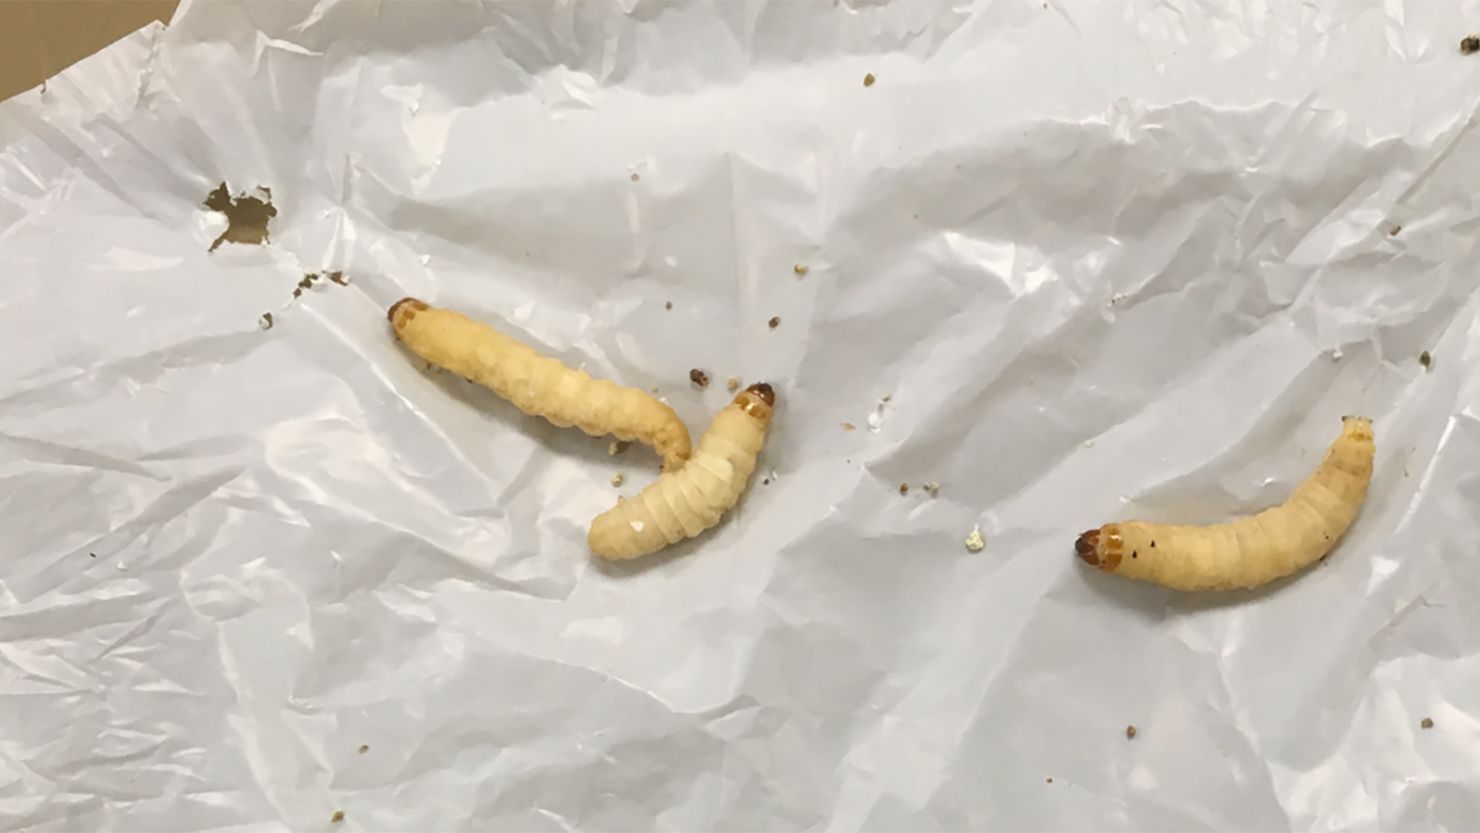 These plastic-chomping caterpillars can help fight pollution